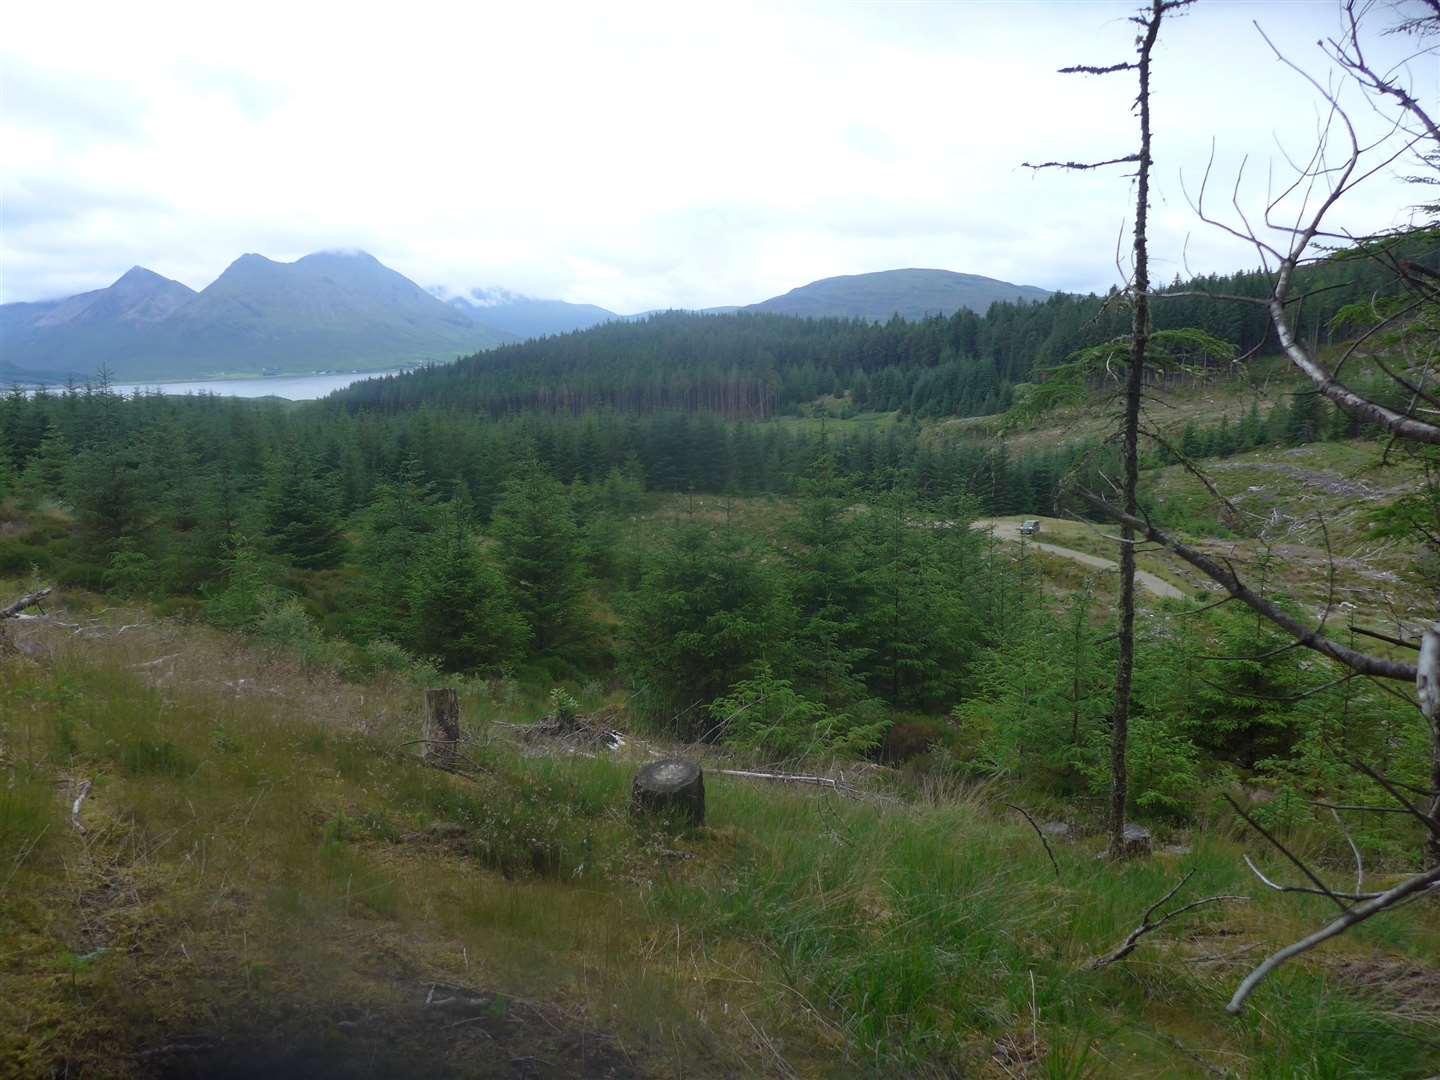 The Raasay scheme from near the top intake looking down to the village.